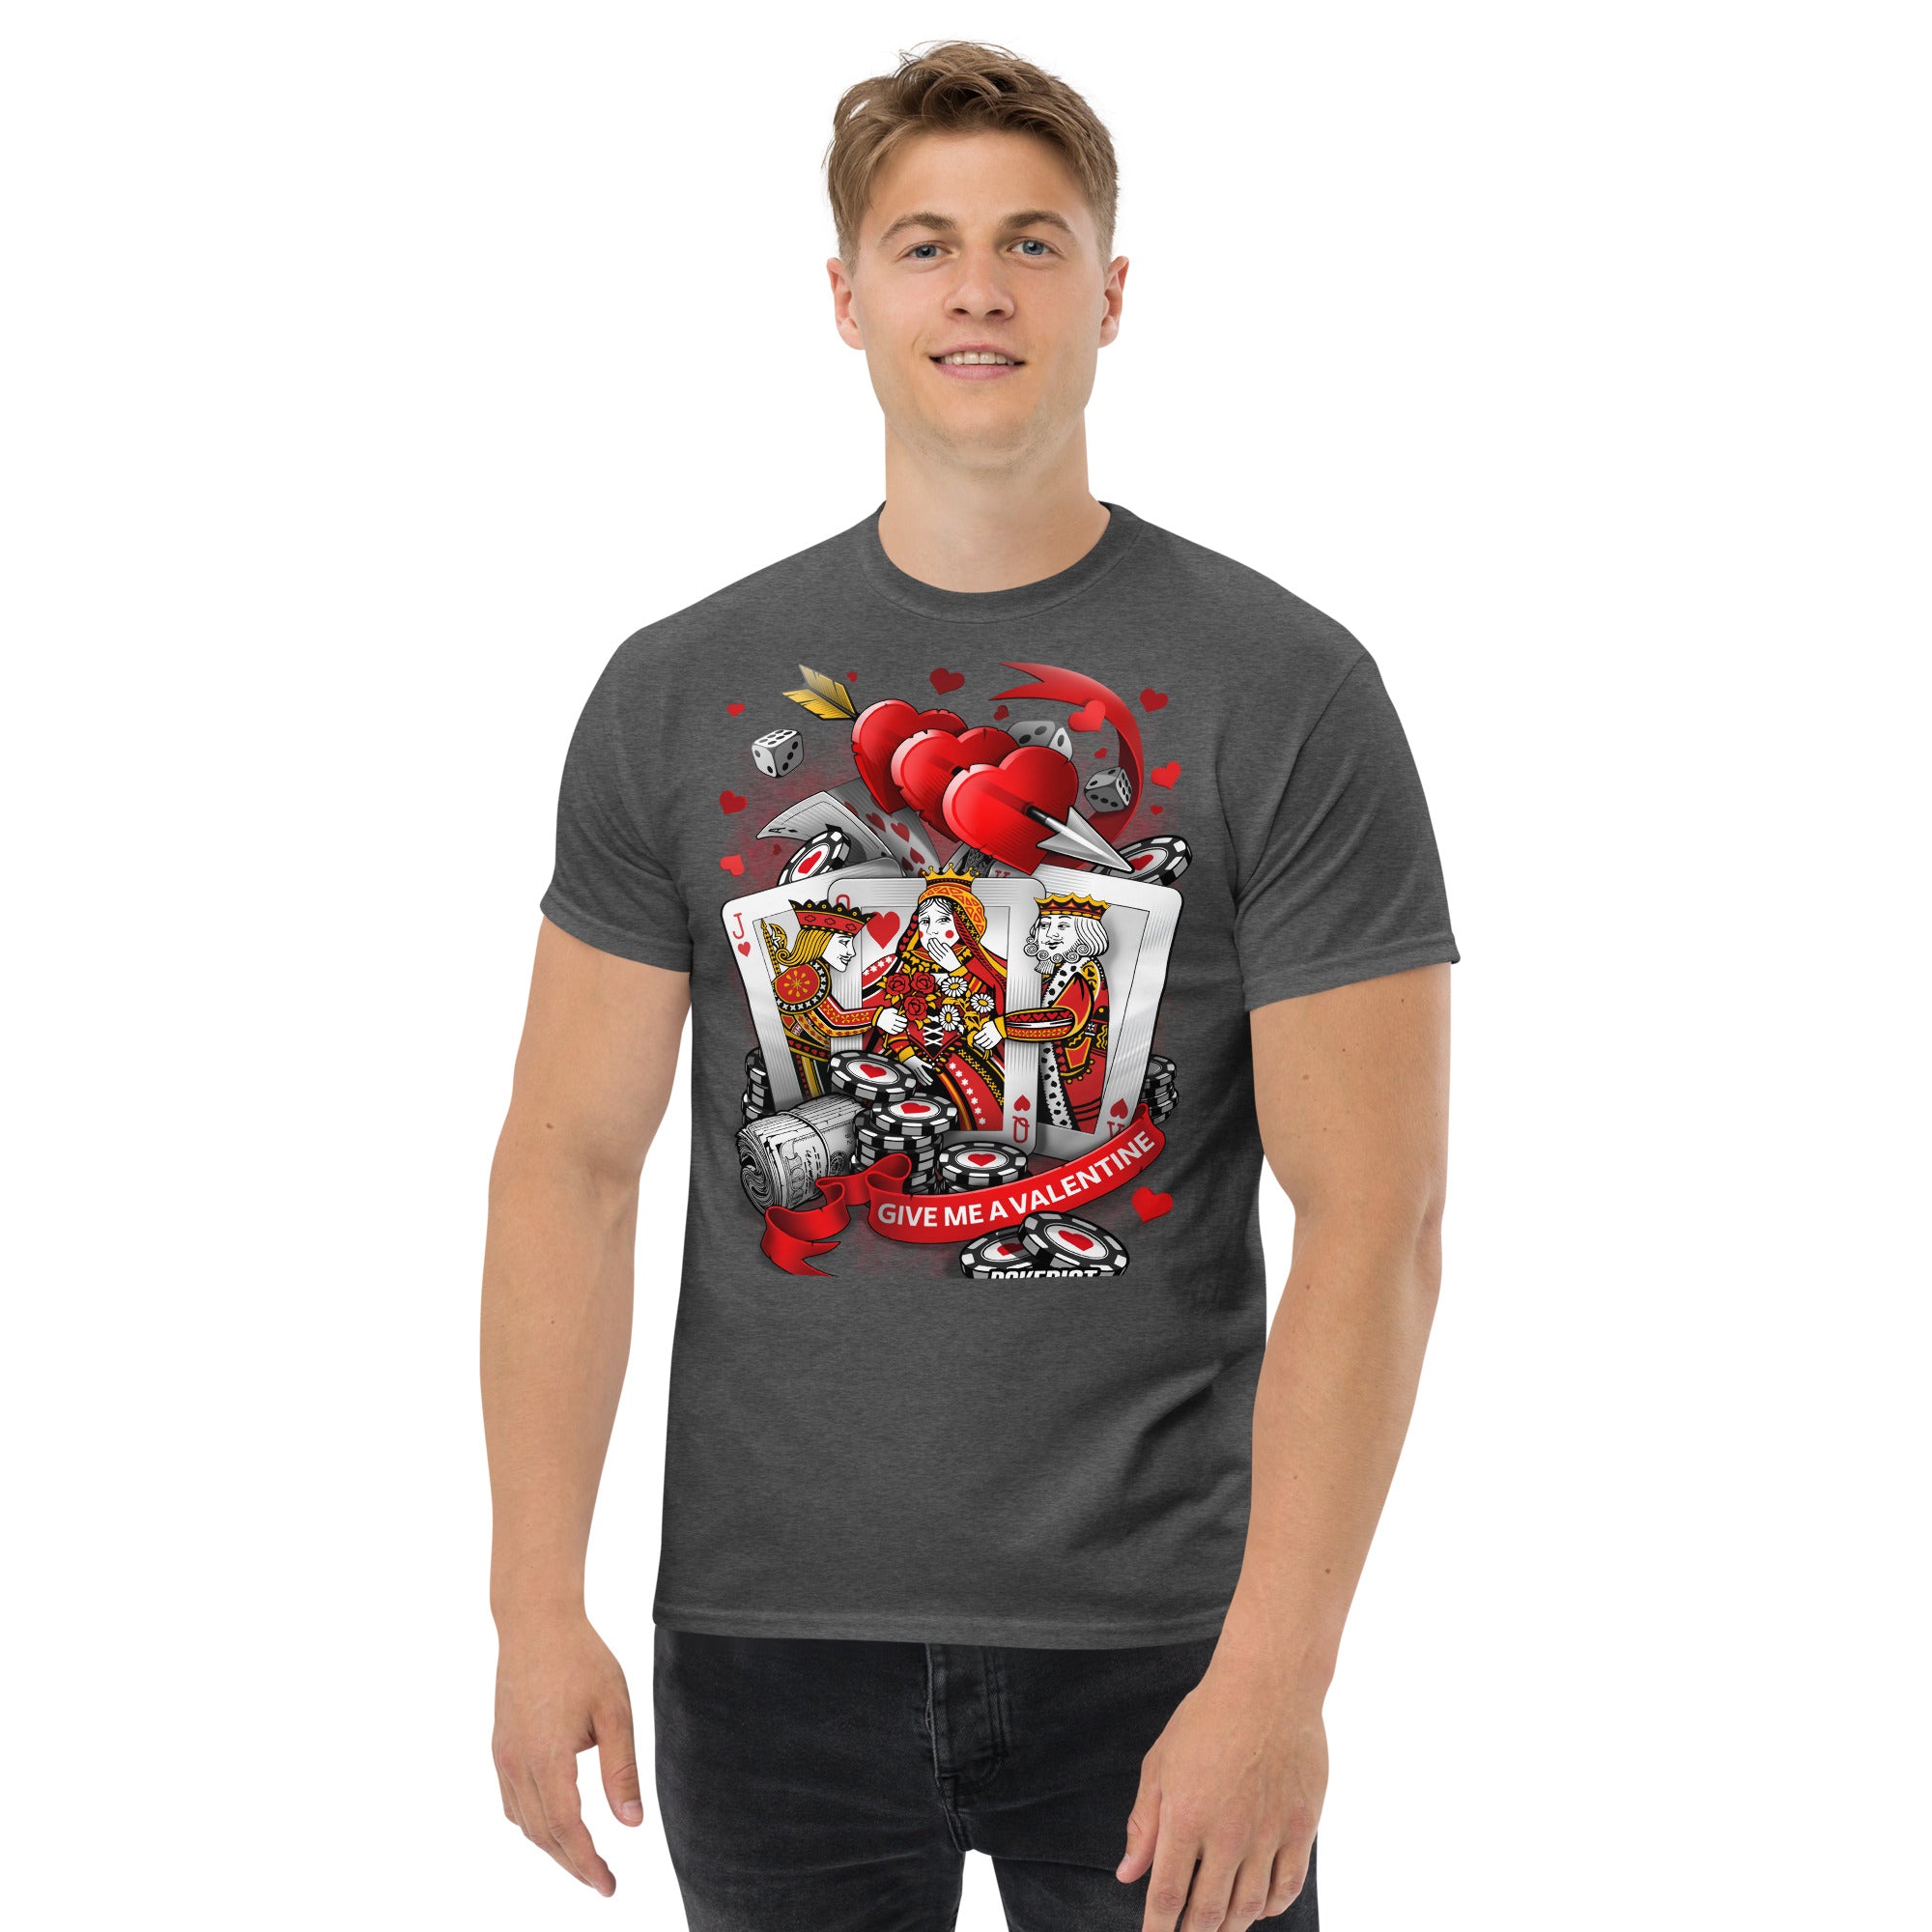 Give Me A Valentine - Men's classic tee - Pokerist